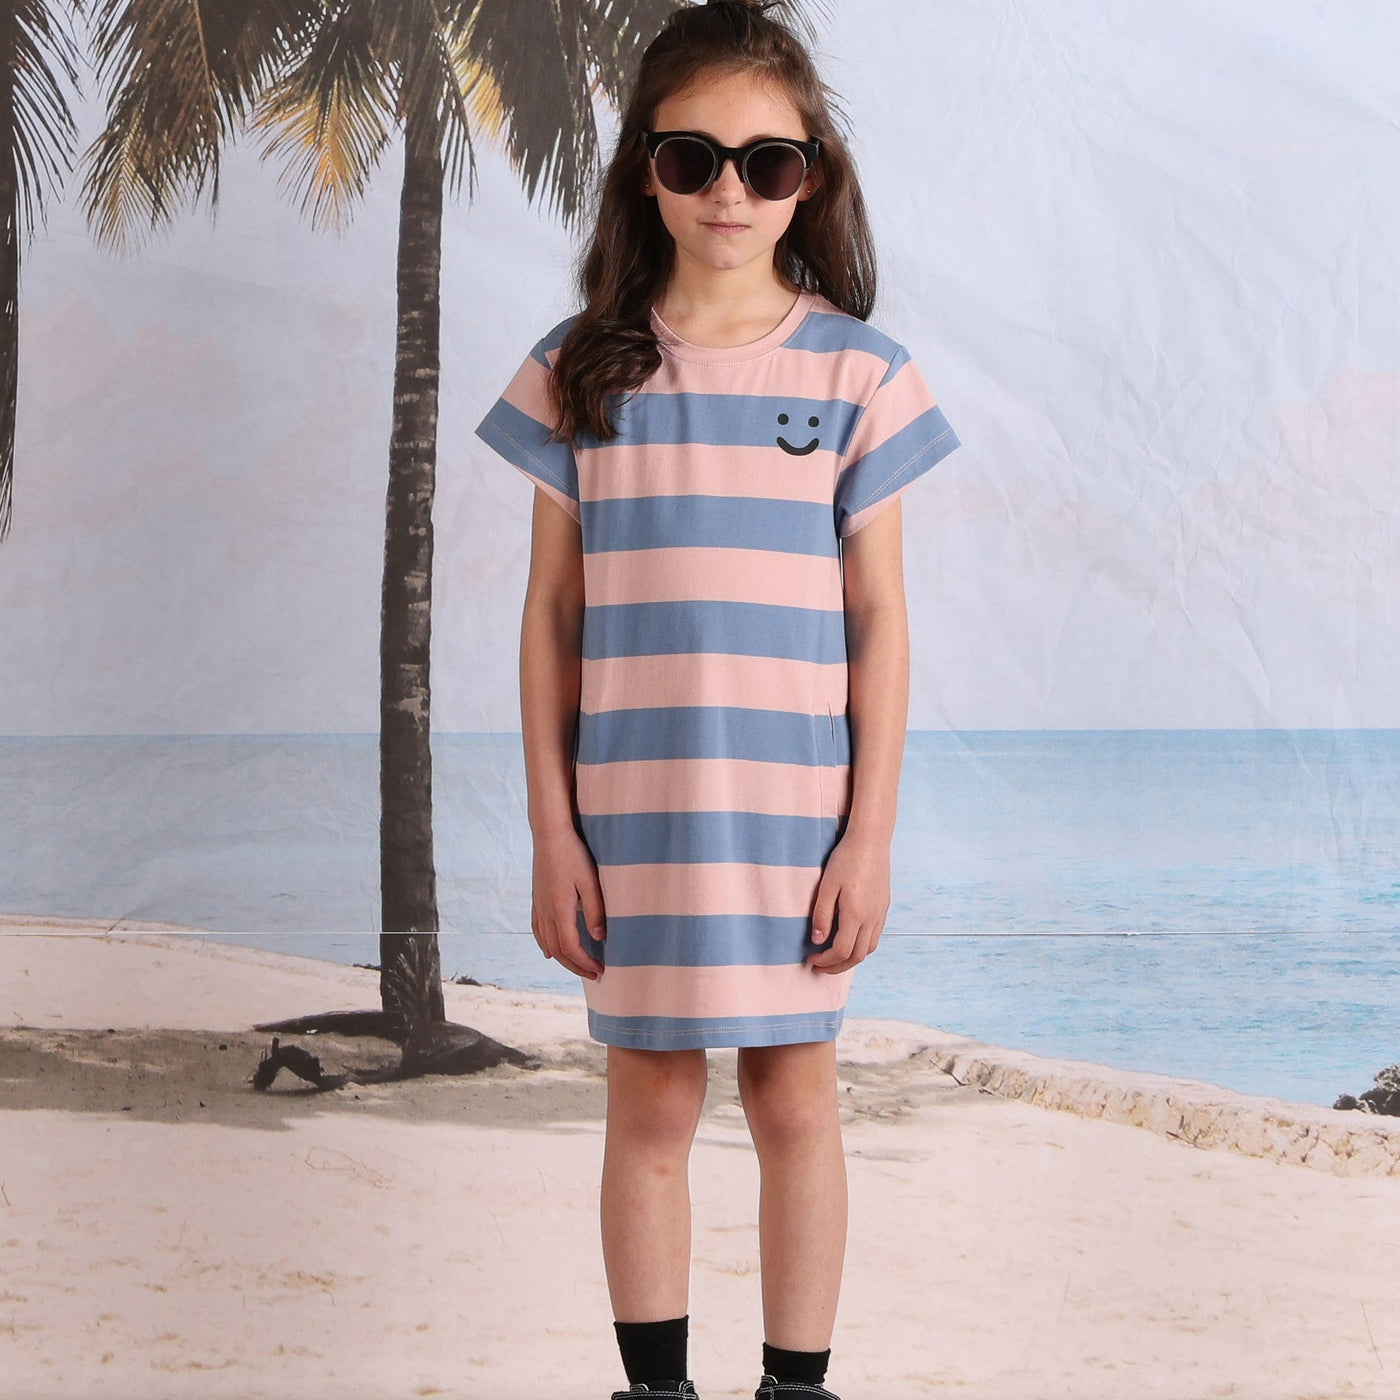 Girls Happy Face Tee Dress - Muted Pink/Blue